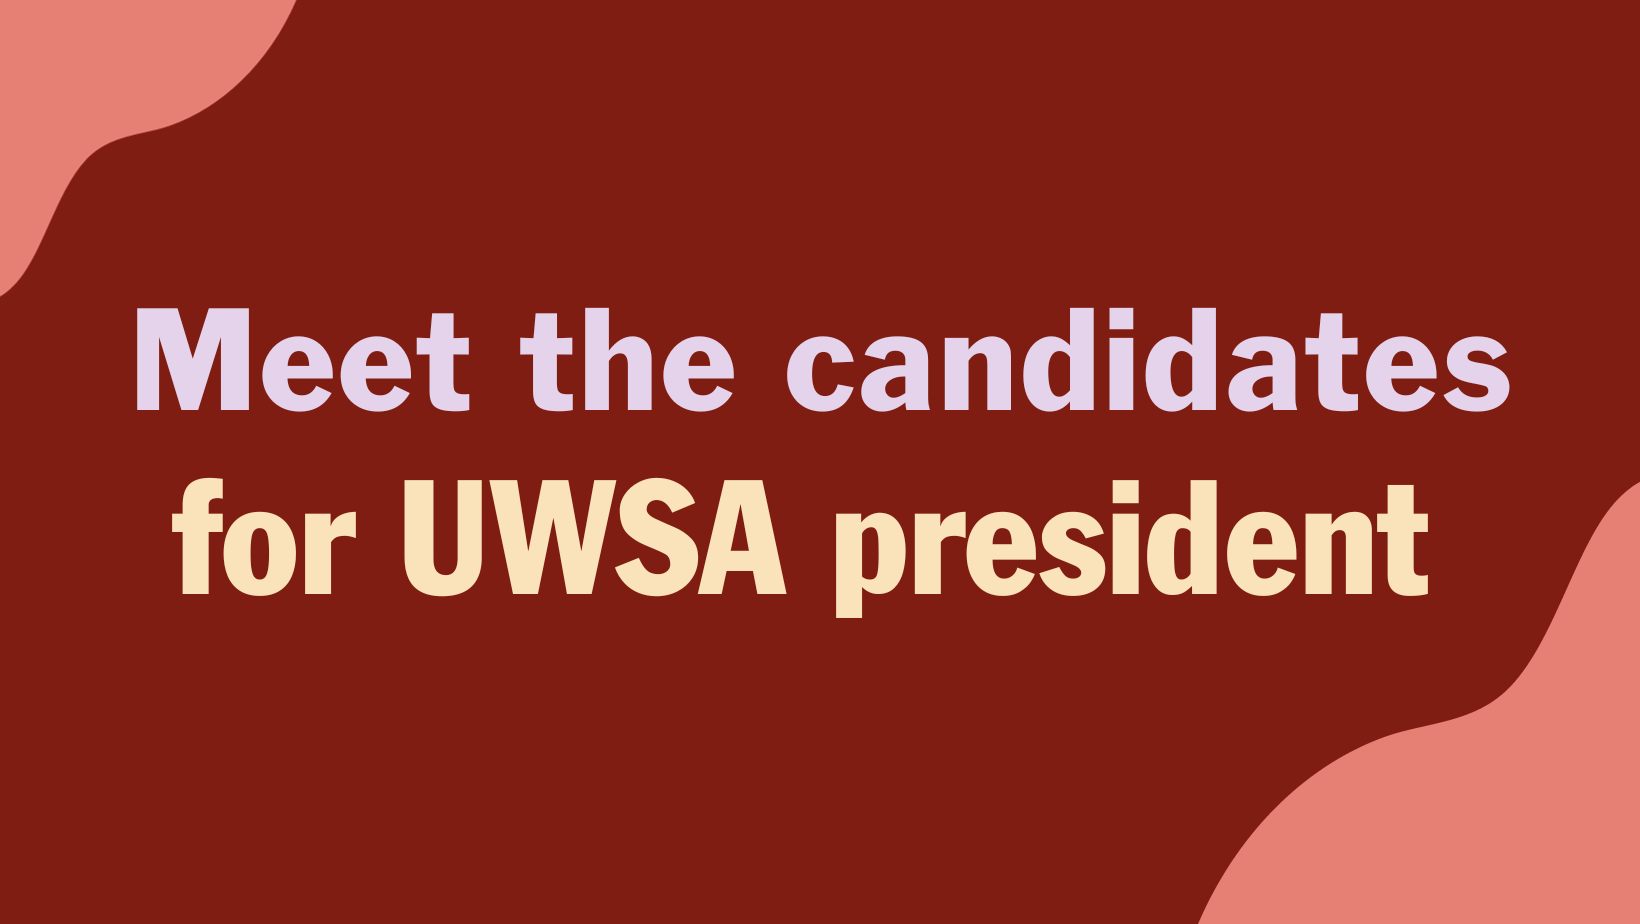 Meet the candidates for UWSA president